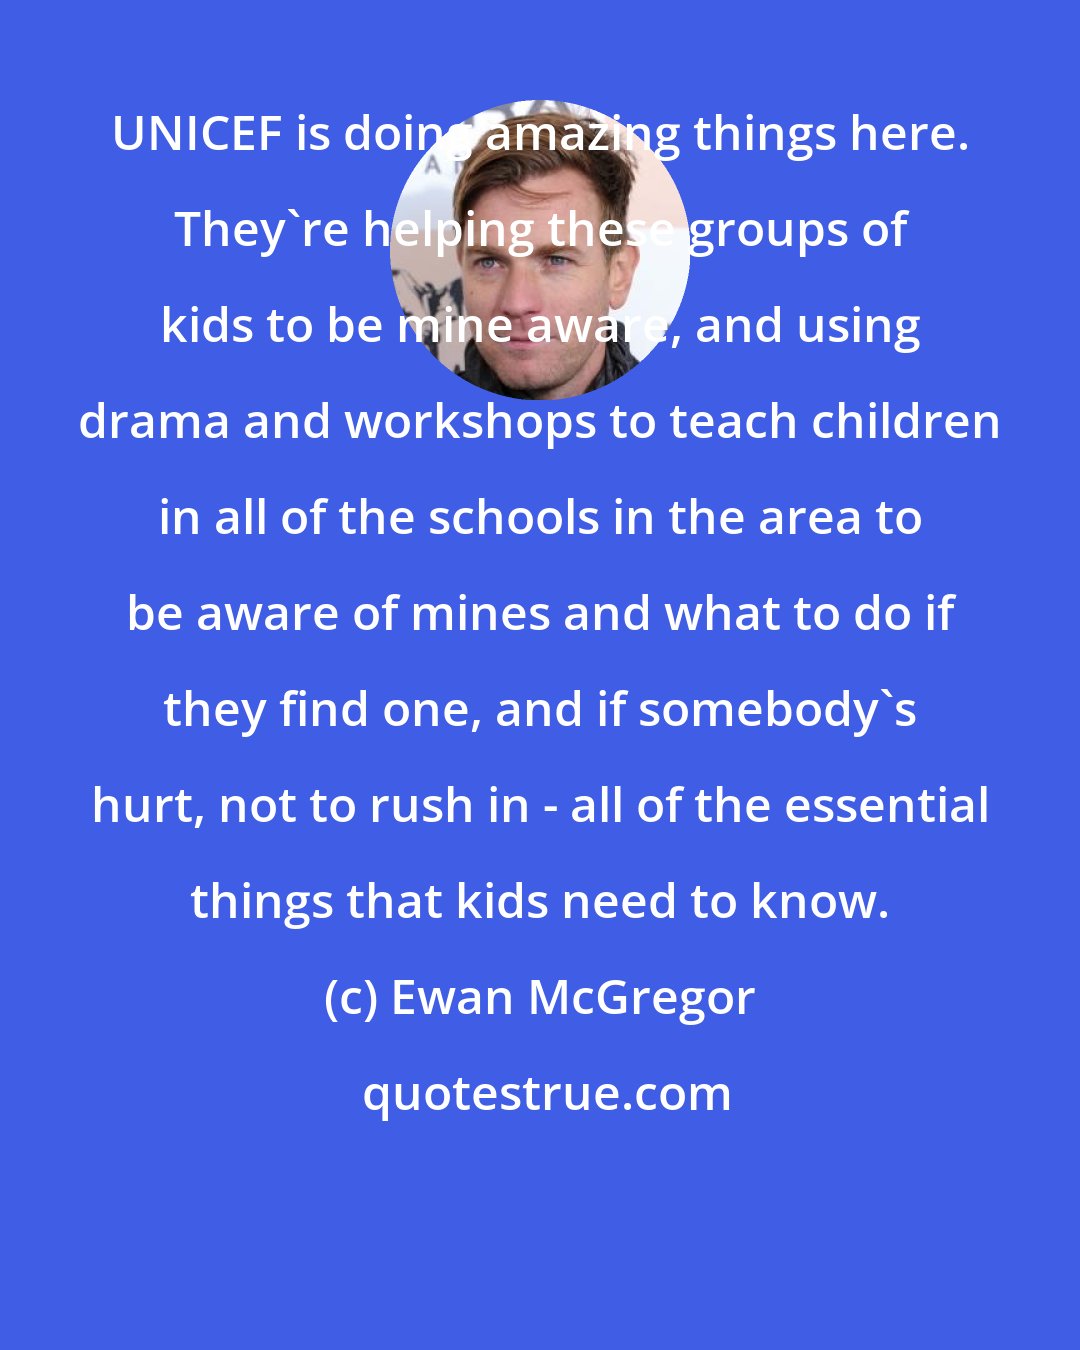 Ewan McGregor: UNICEF is doing amazing things here. They're helping these groups of kids to be mine aware, and using drama and workshops to teach children in all of the schools in the area to be aware of mines and what to do if they find one, and if somebody's hurt, not to rush in - all of the essential things that kids need to know.